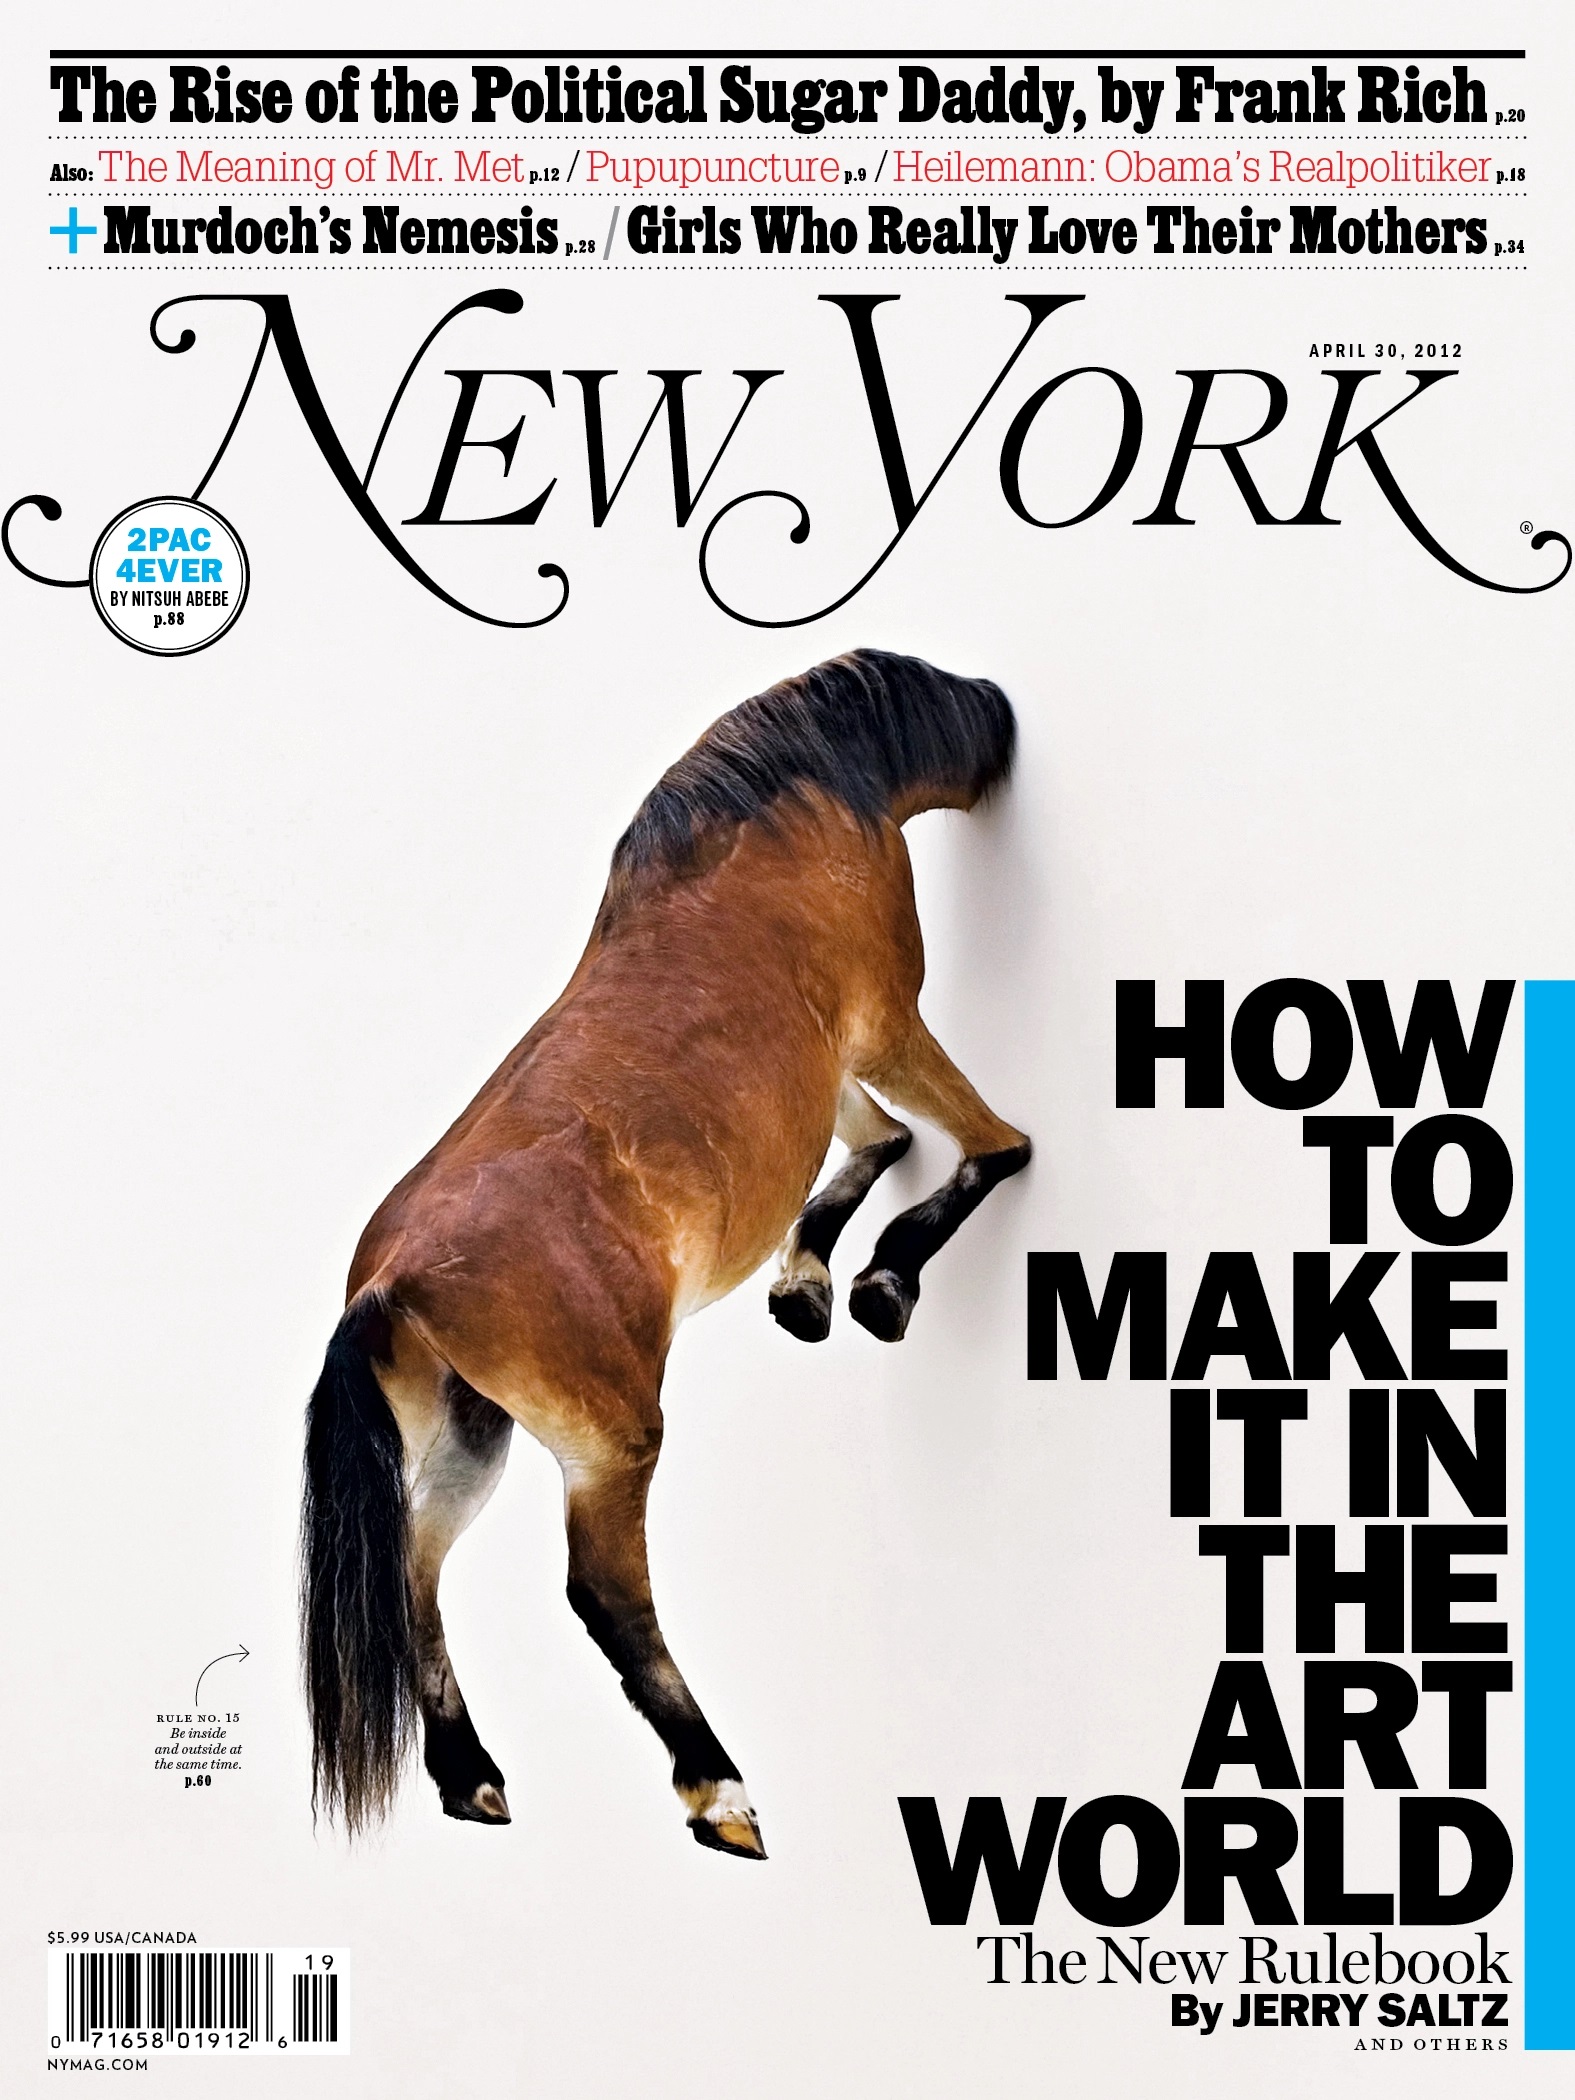 New York-April 30, 2012: "How to Make It in the Art World"